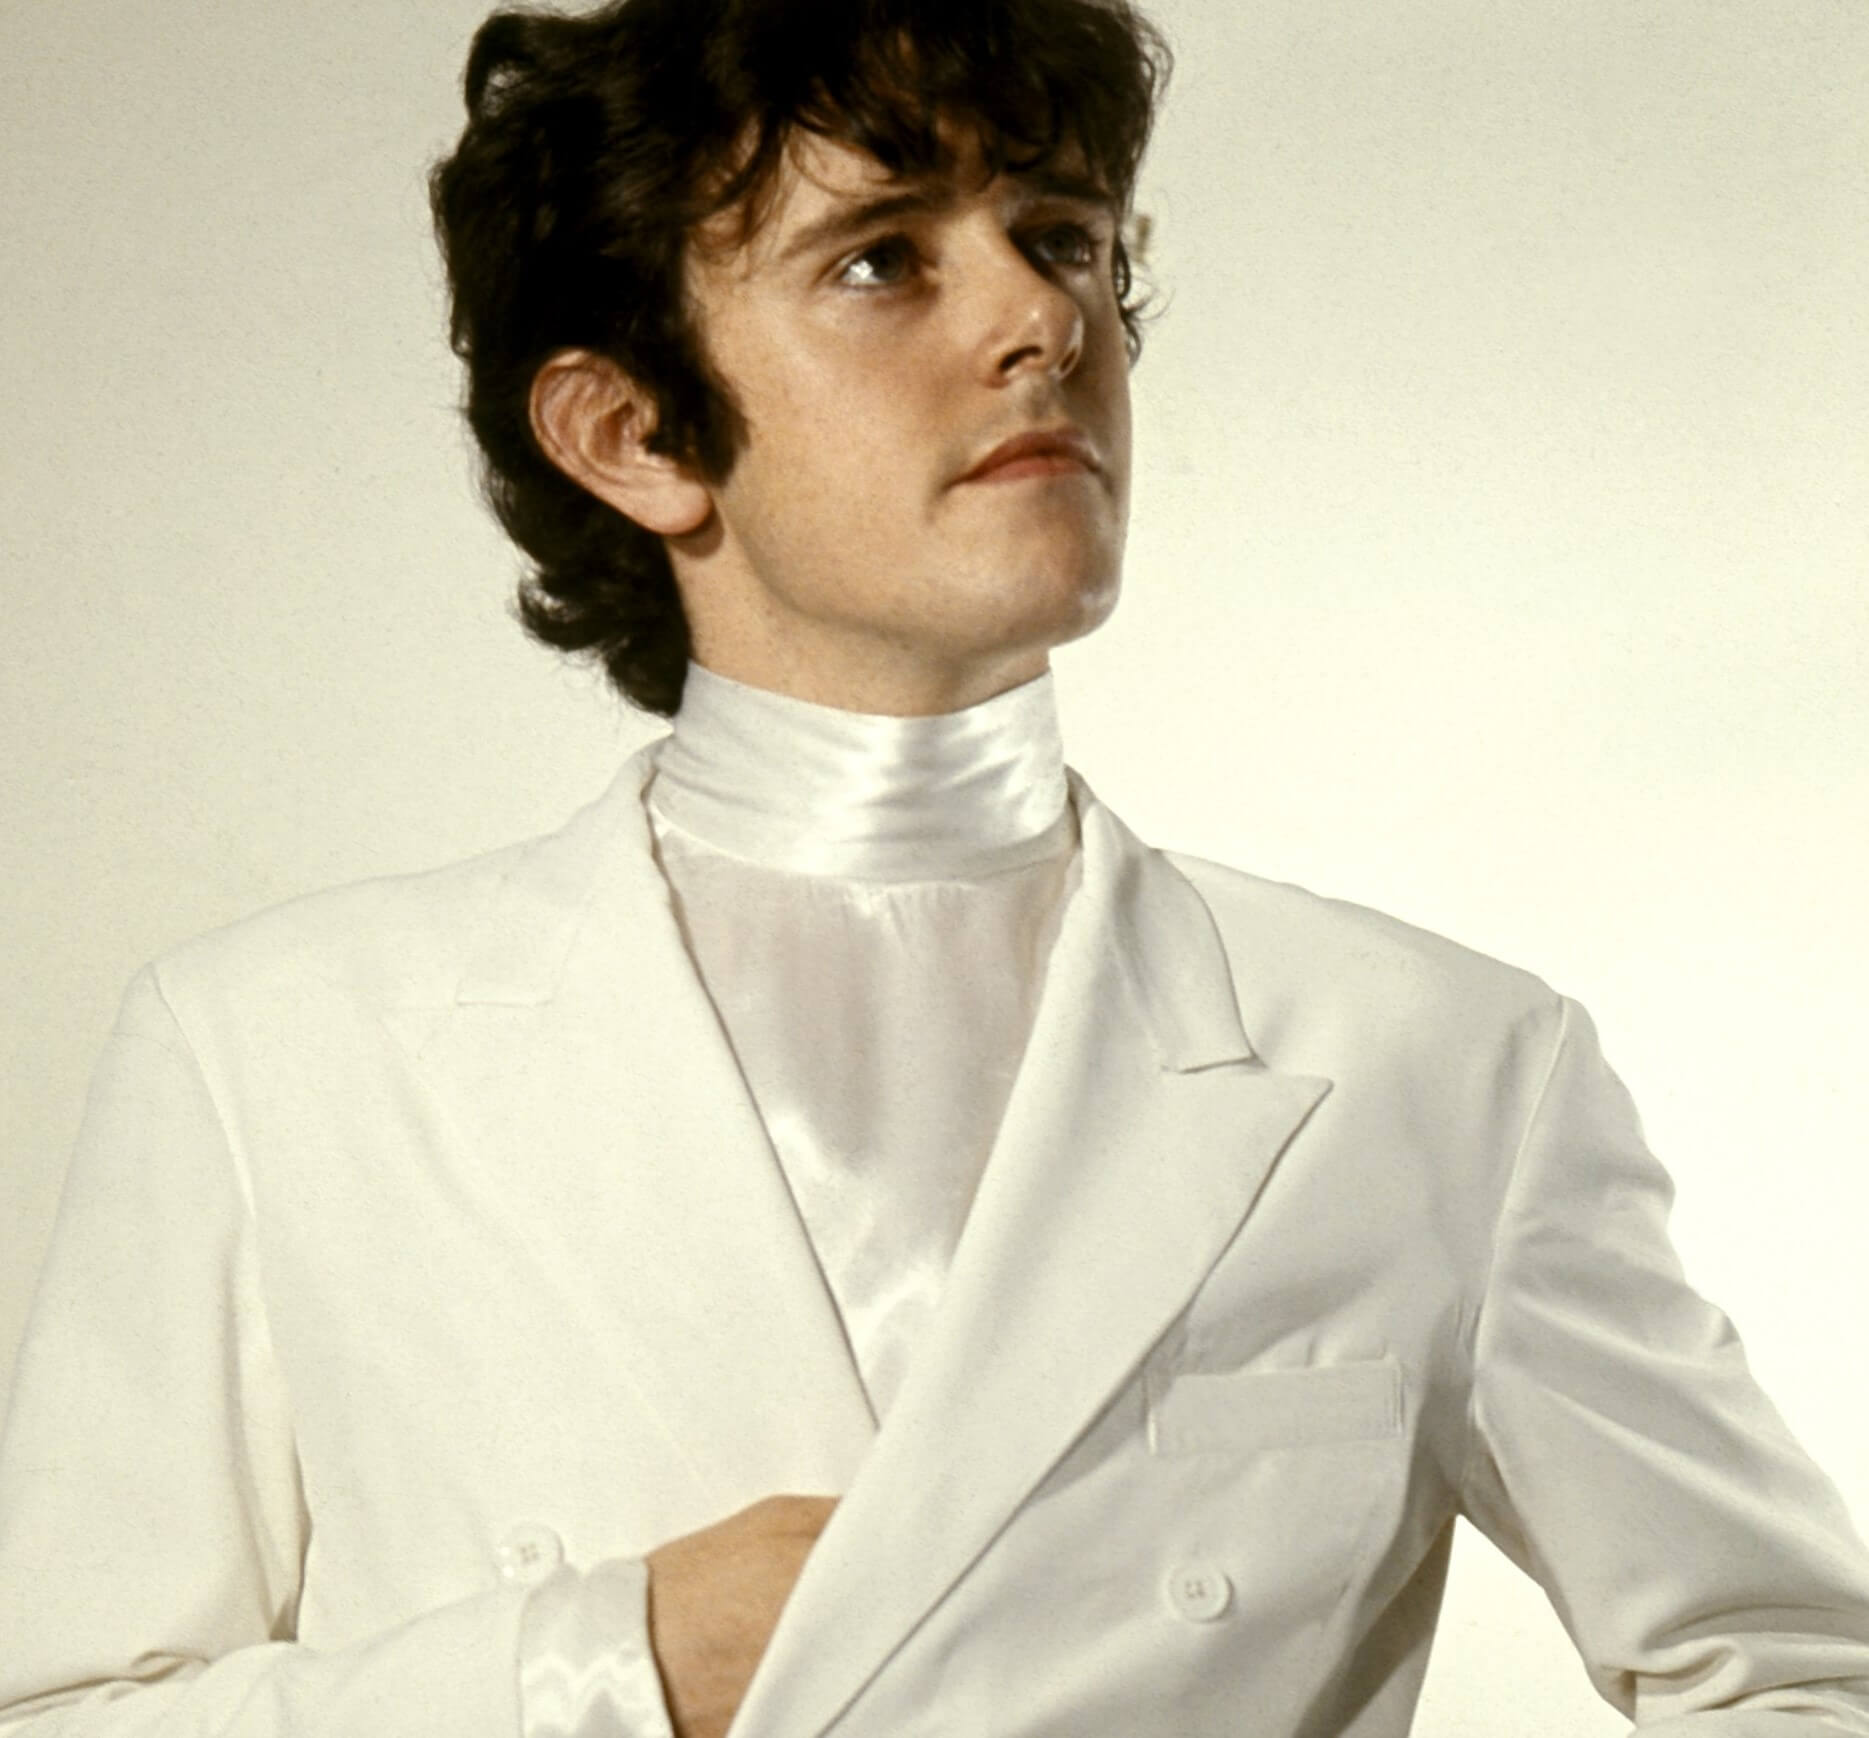 Donovan in a white suit